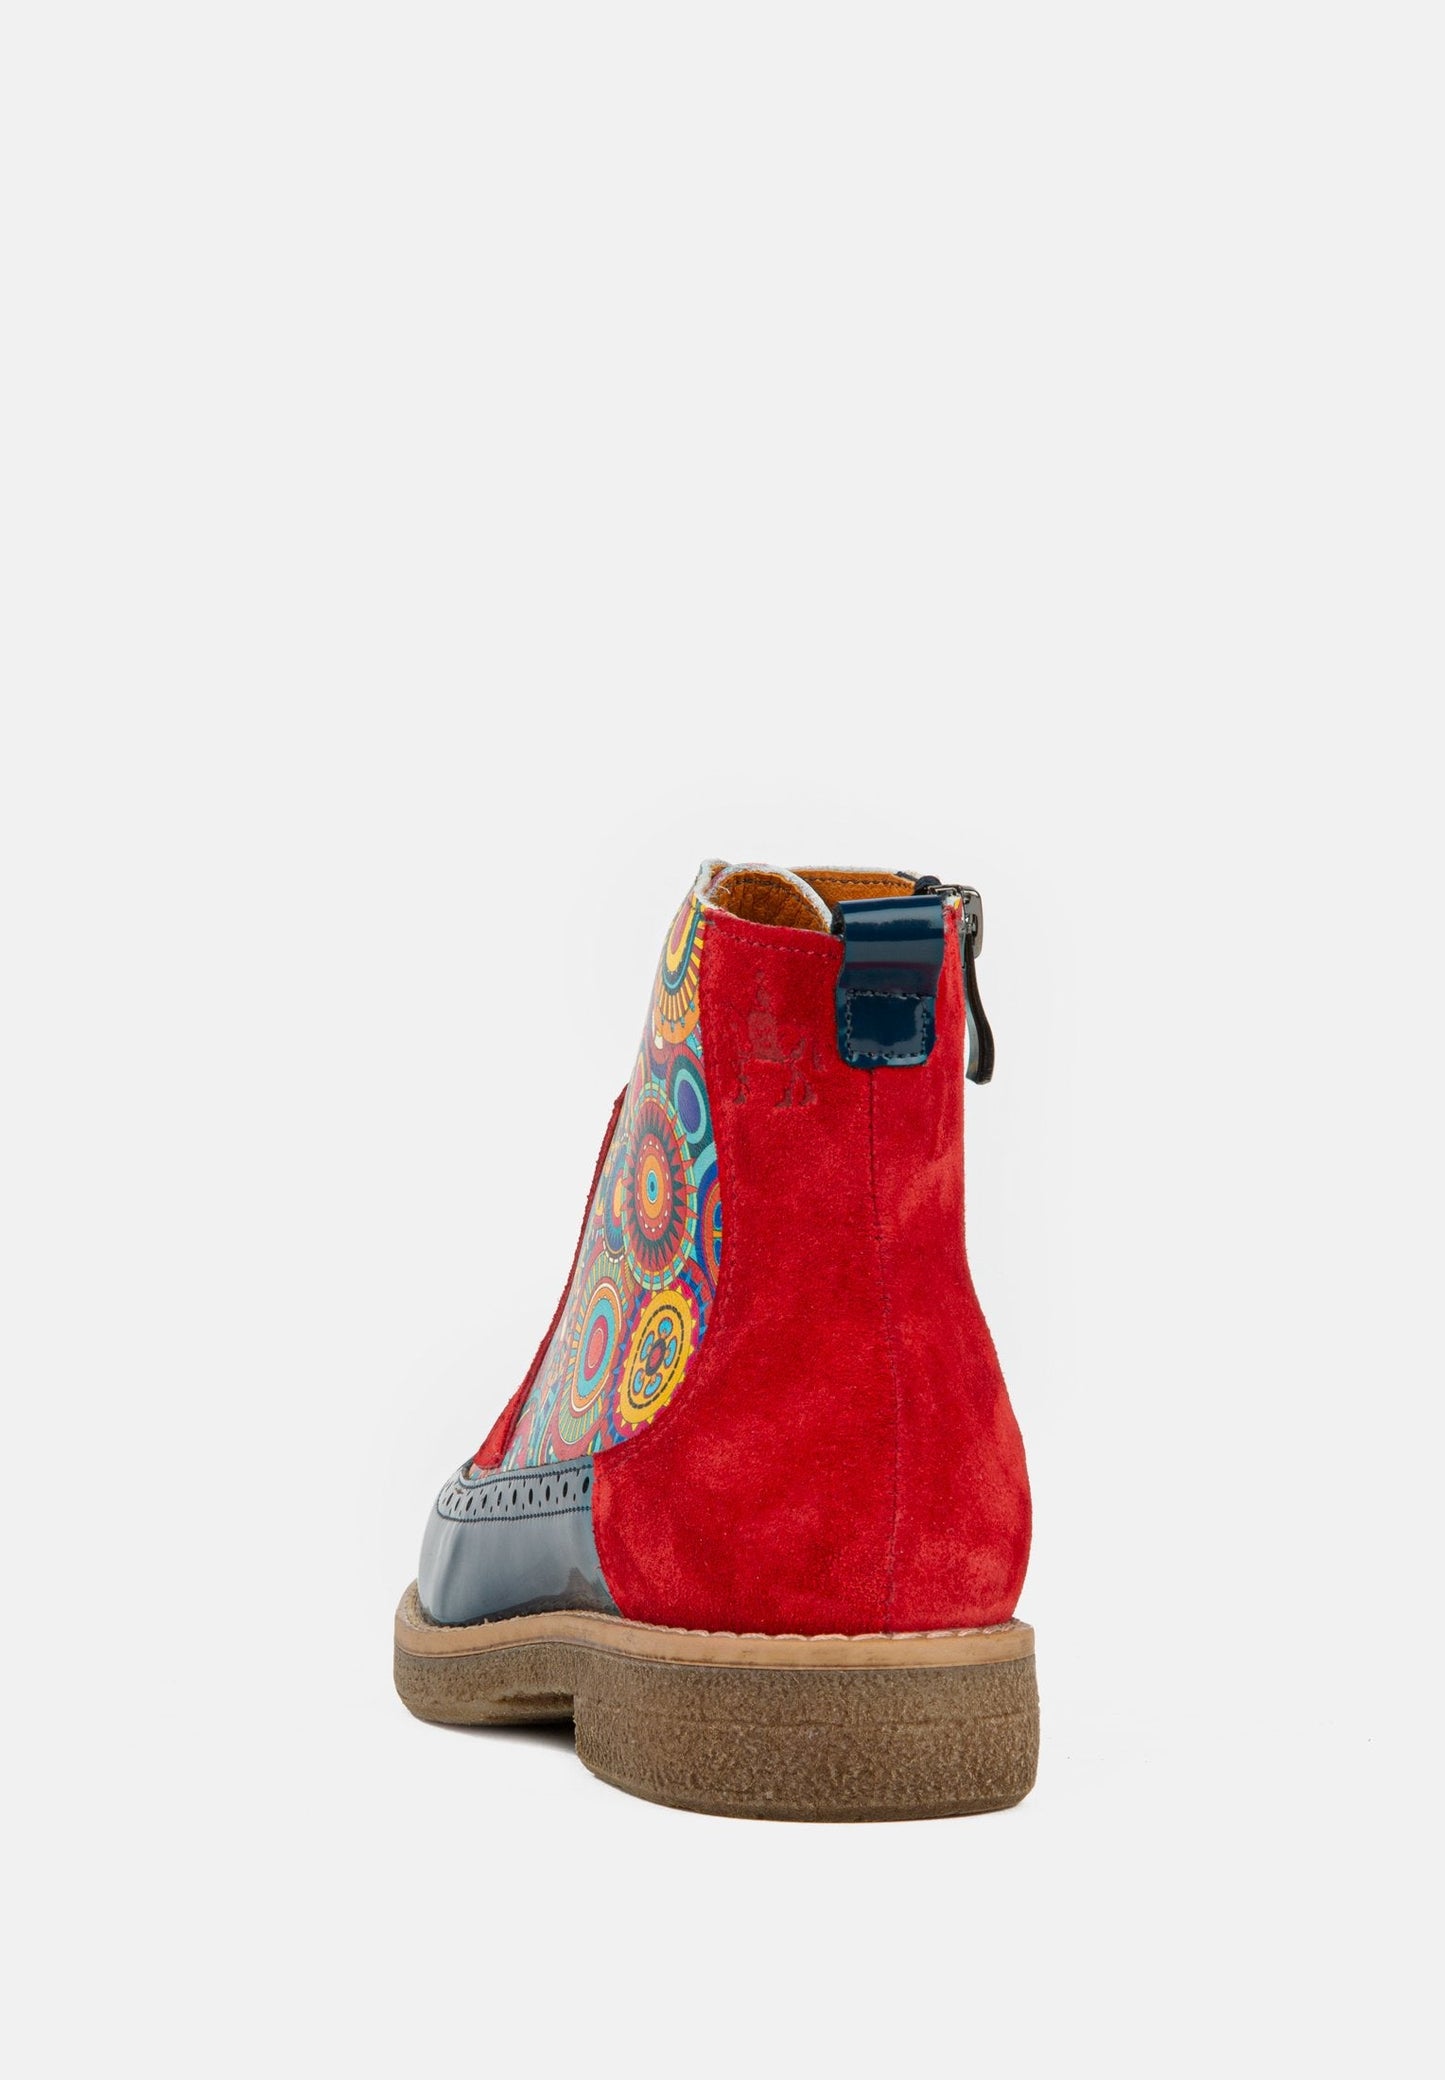 Hatter - 'Signature' Red & Navy Ankle Boots Embassy London 